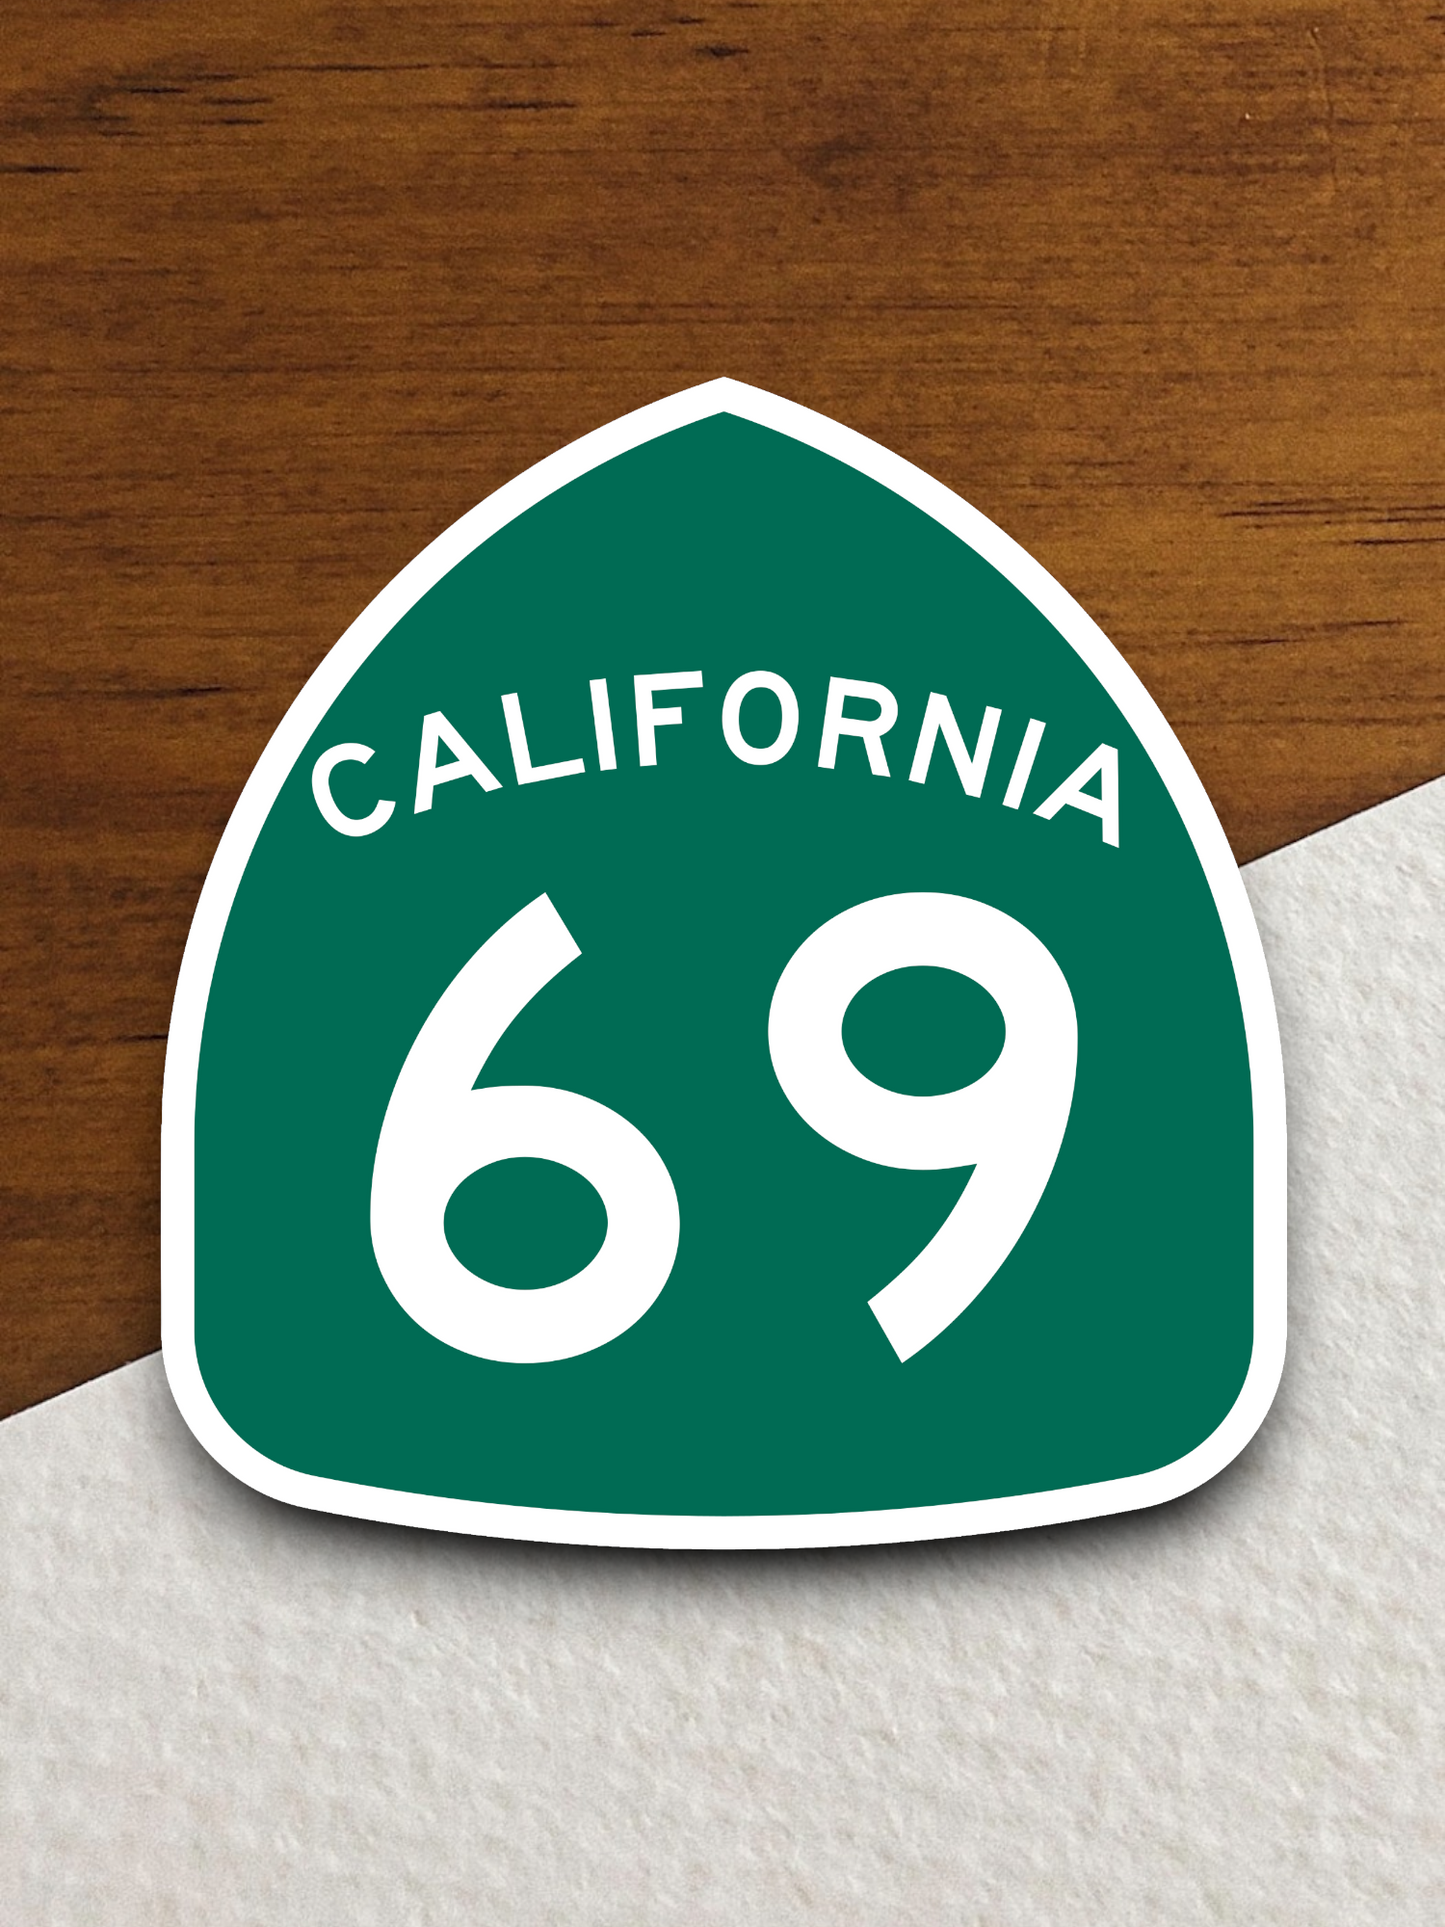 California State Route 69 Road Sign Sticker